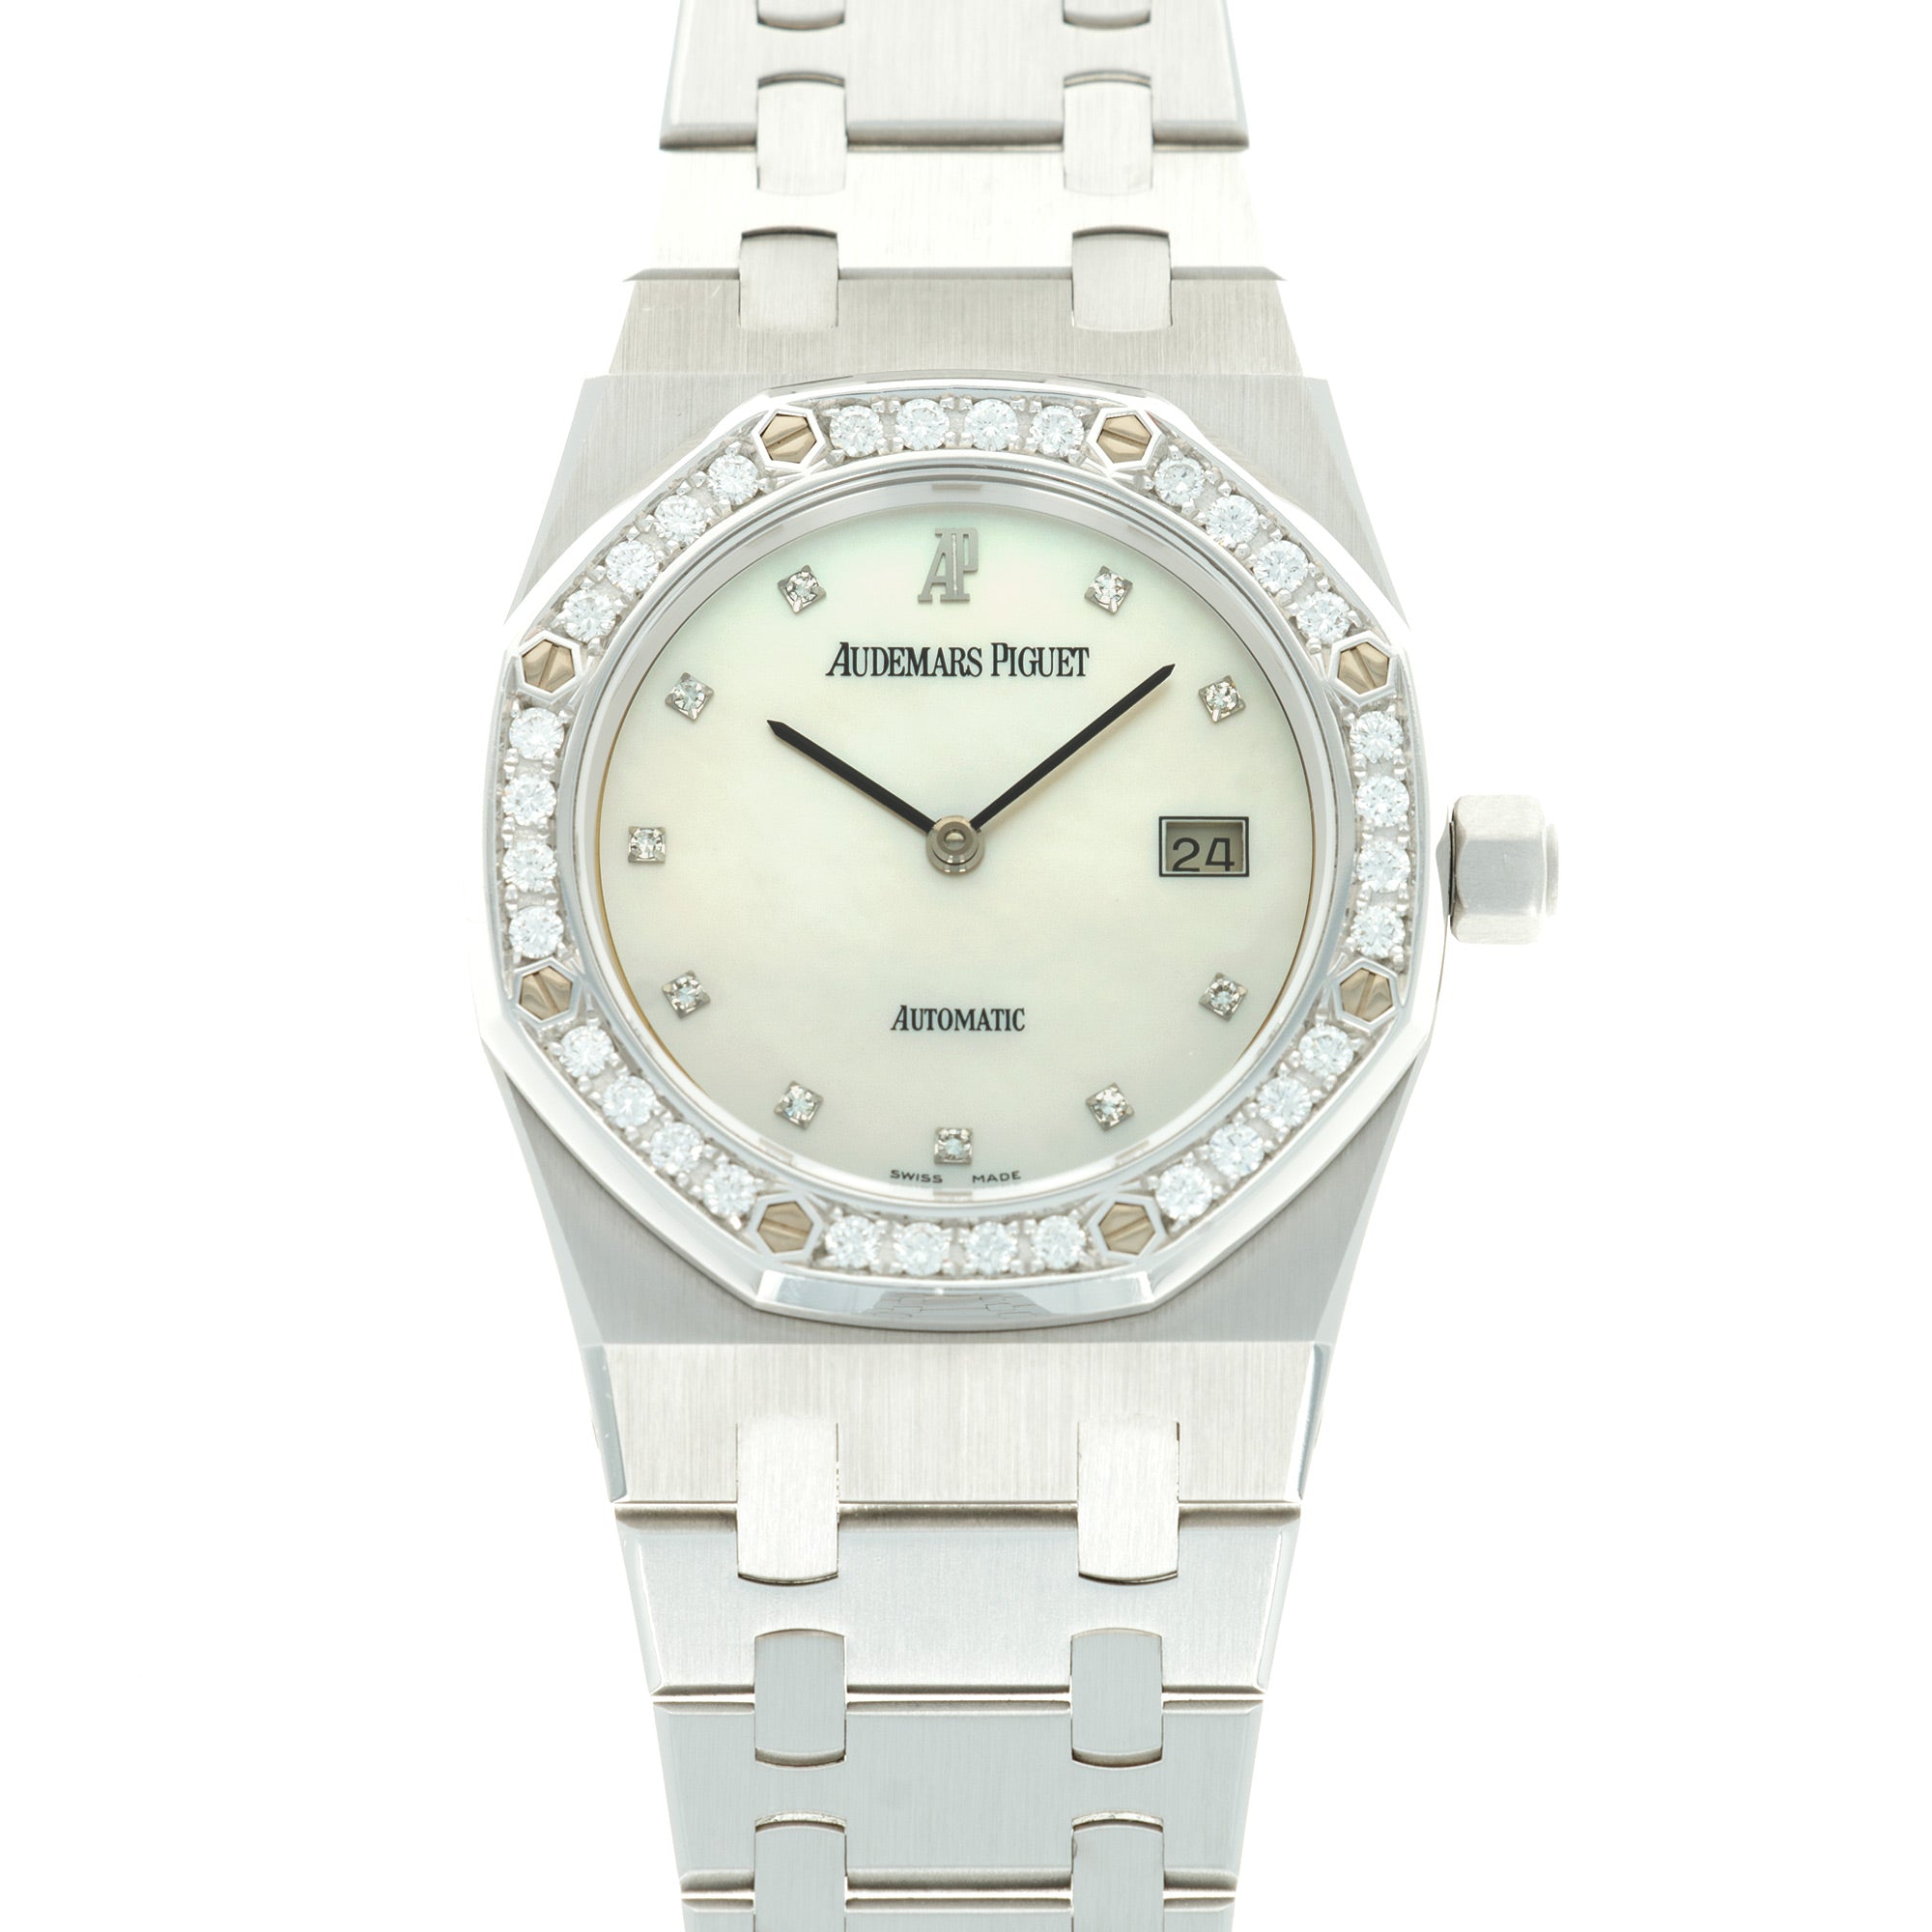 Audemars Piguet - Audemars Piguet White Gold Royal Oak Ref. 15054 with Mother Of Pearl Dial - The Keystone Watches